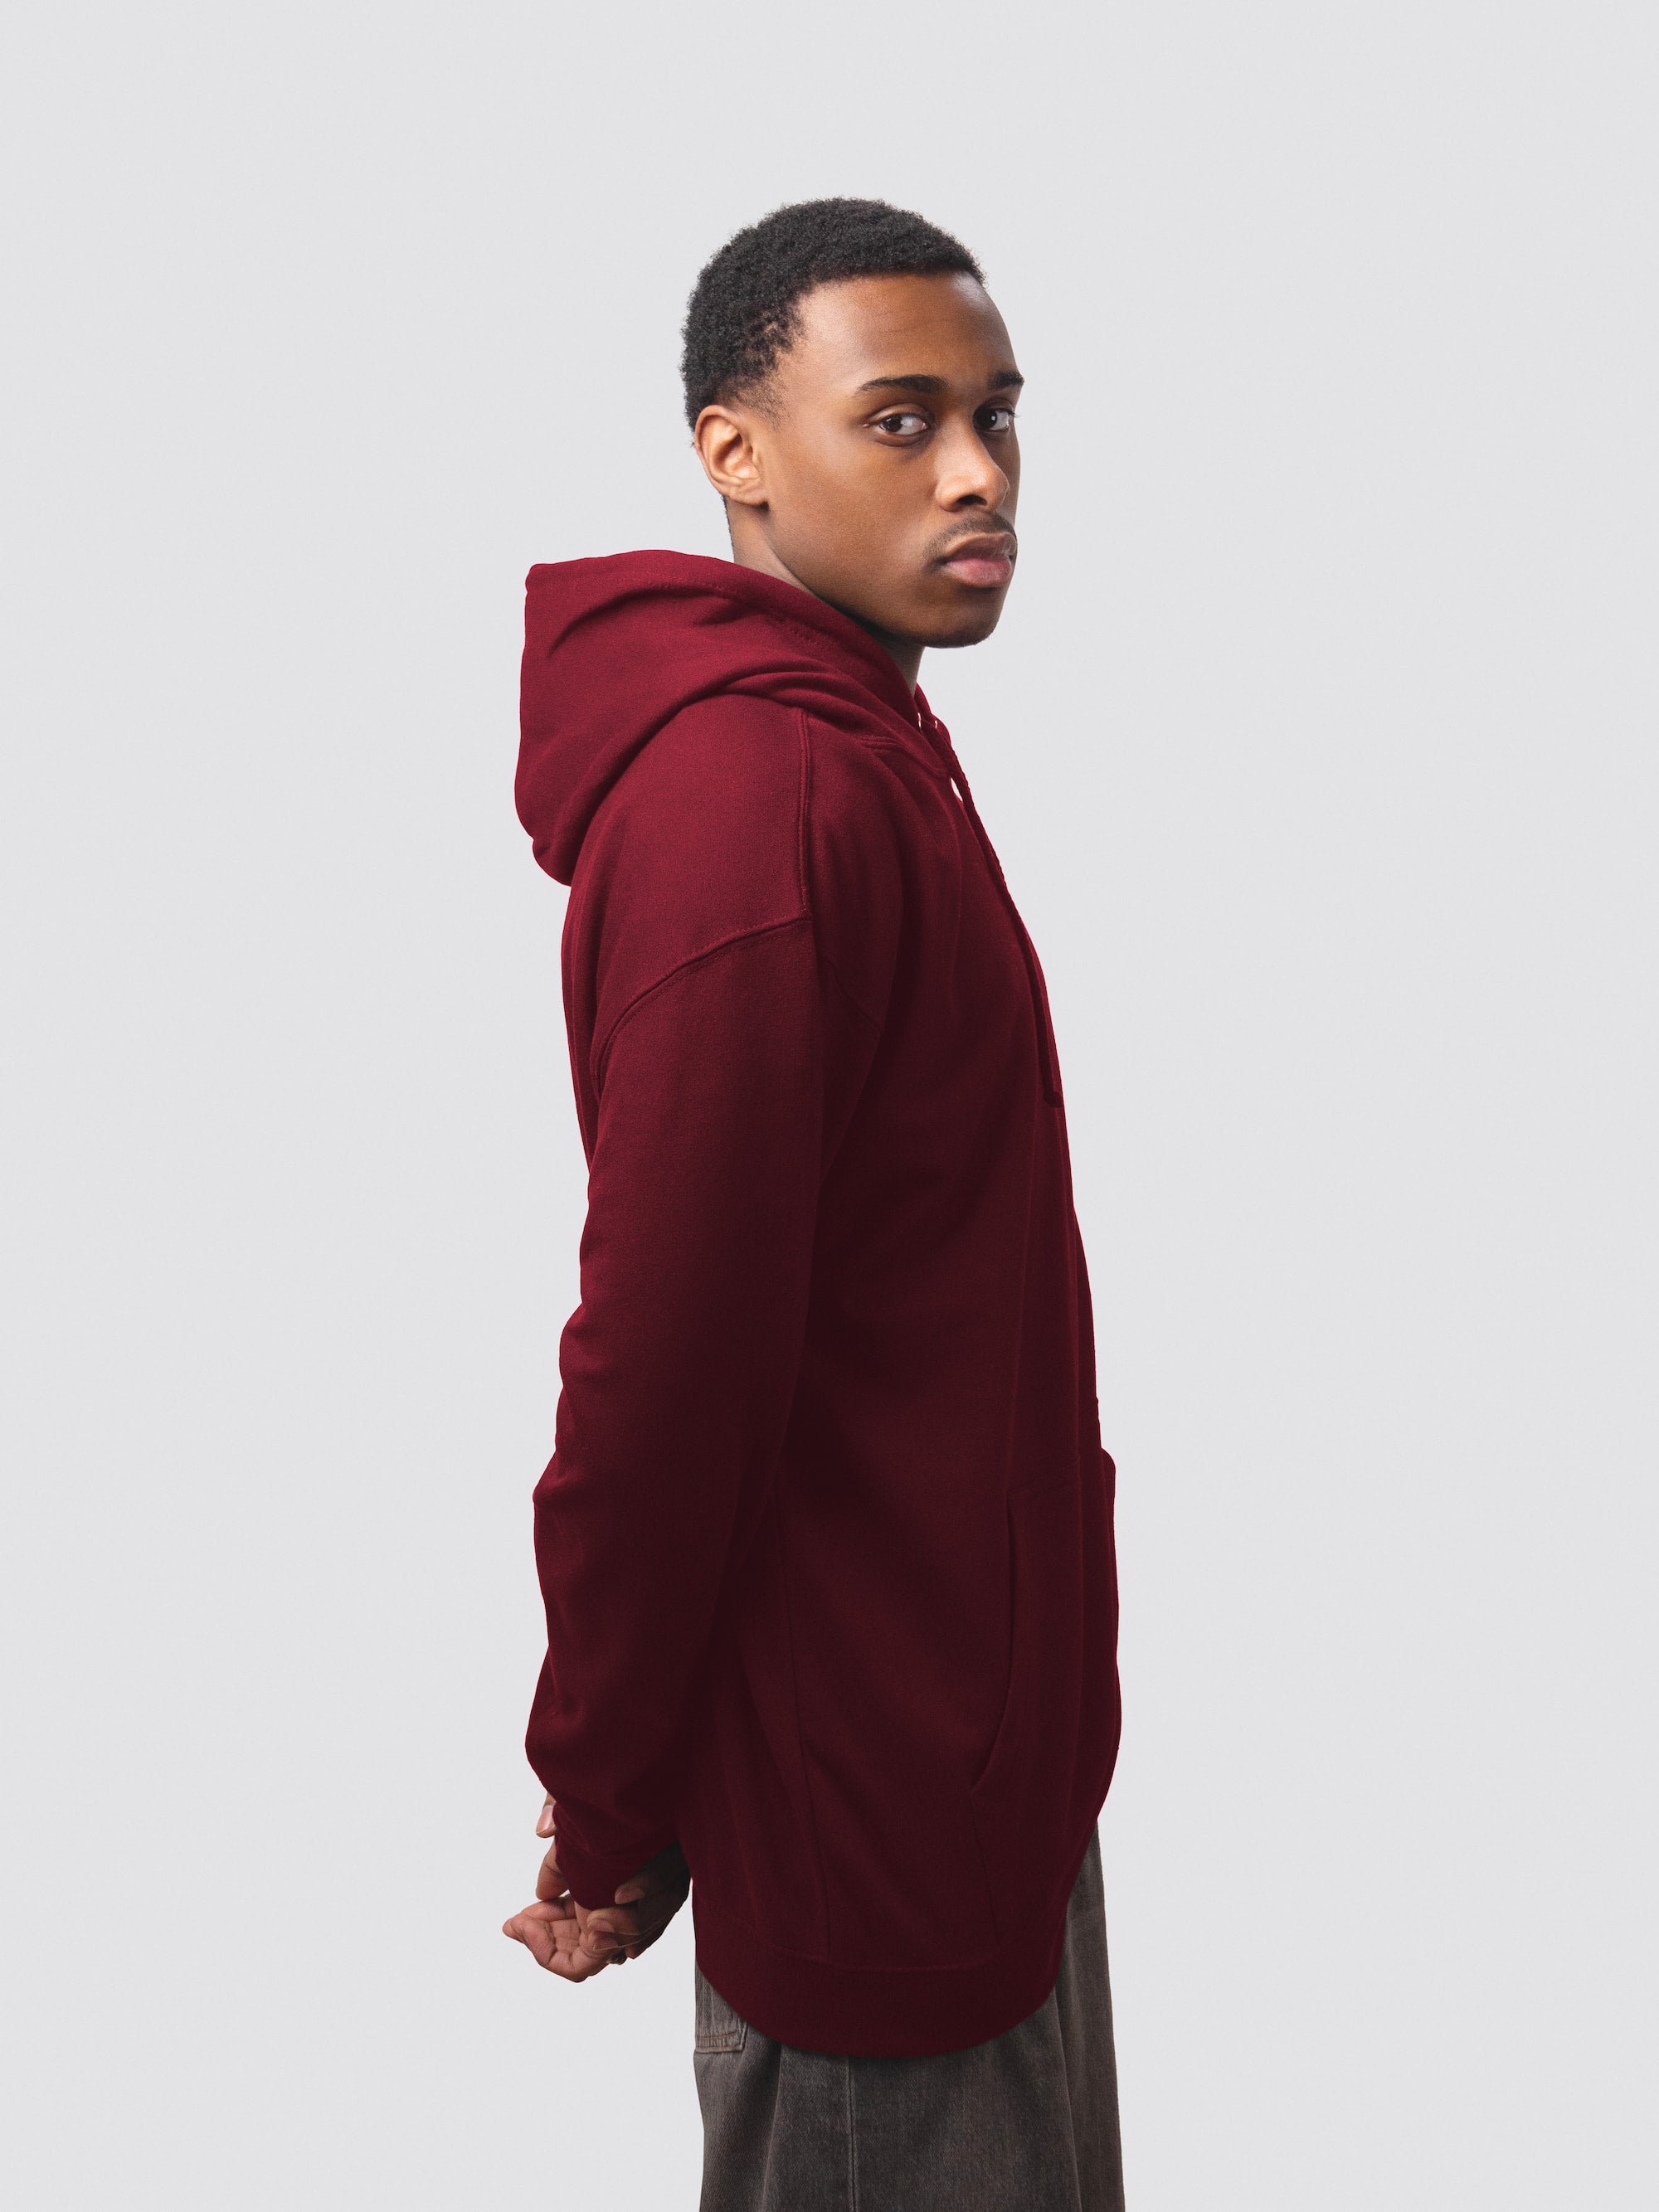 John Snow College hoodie, made from burgundy cotton-faced fabric